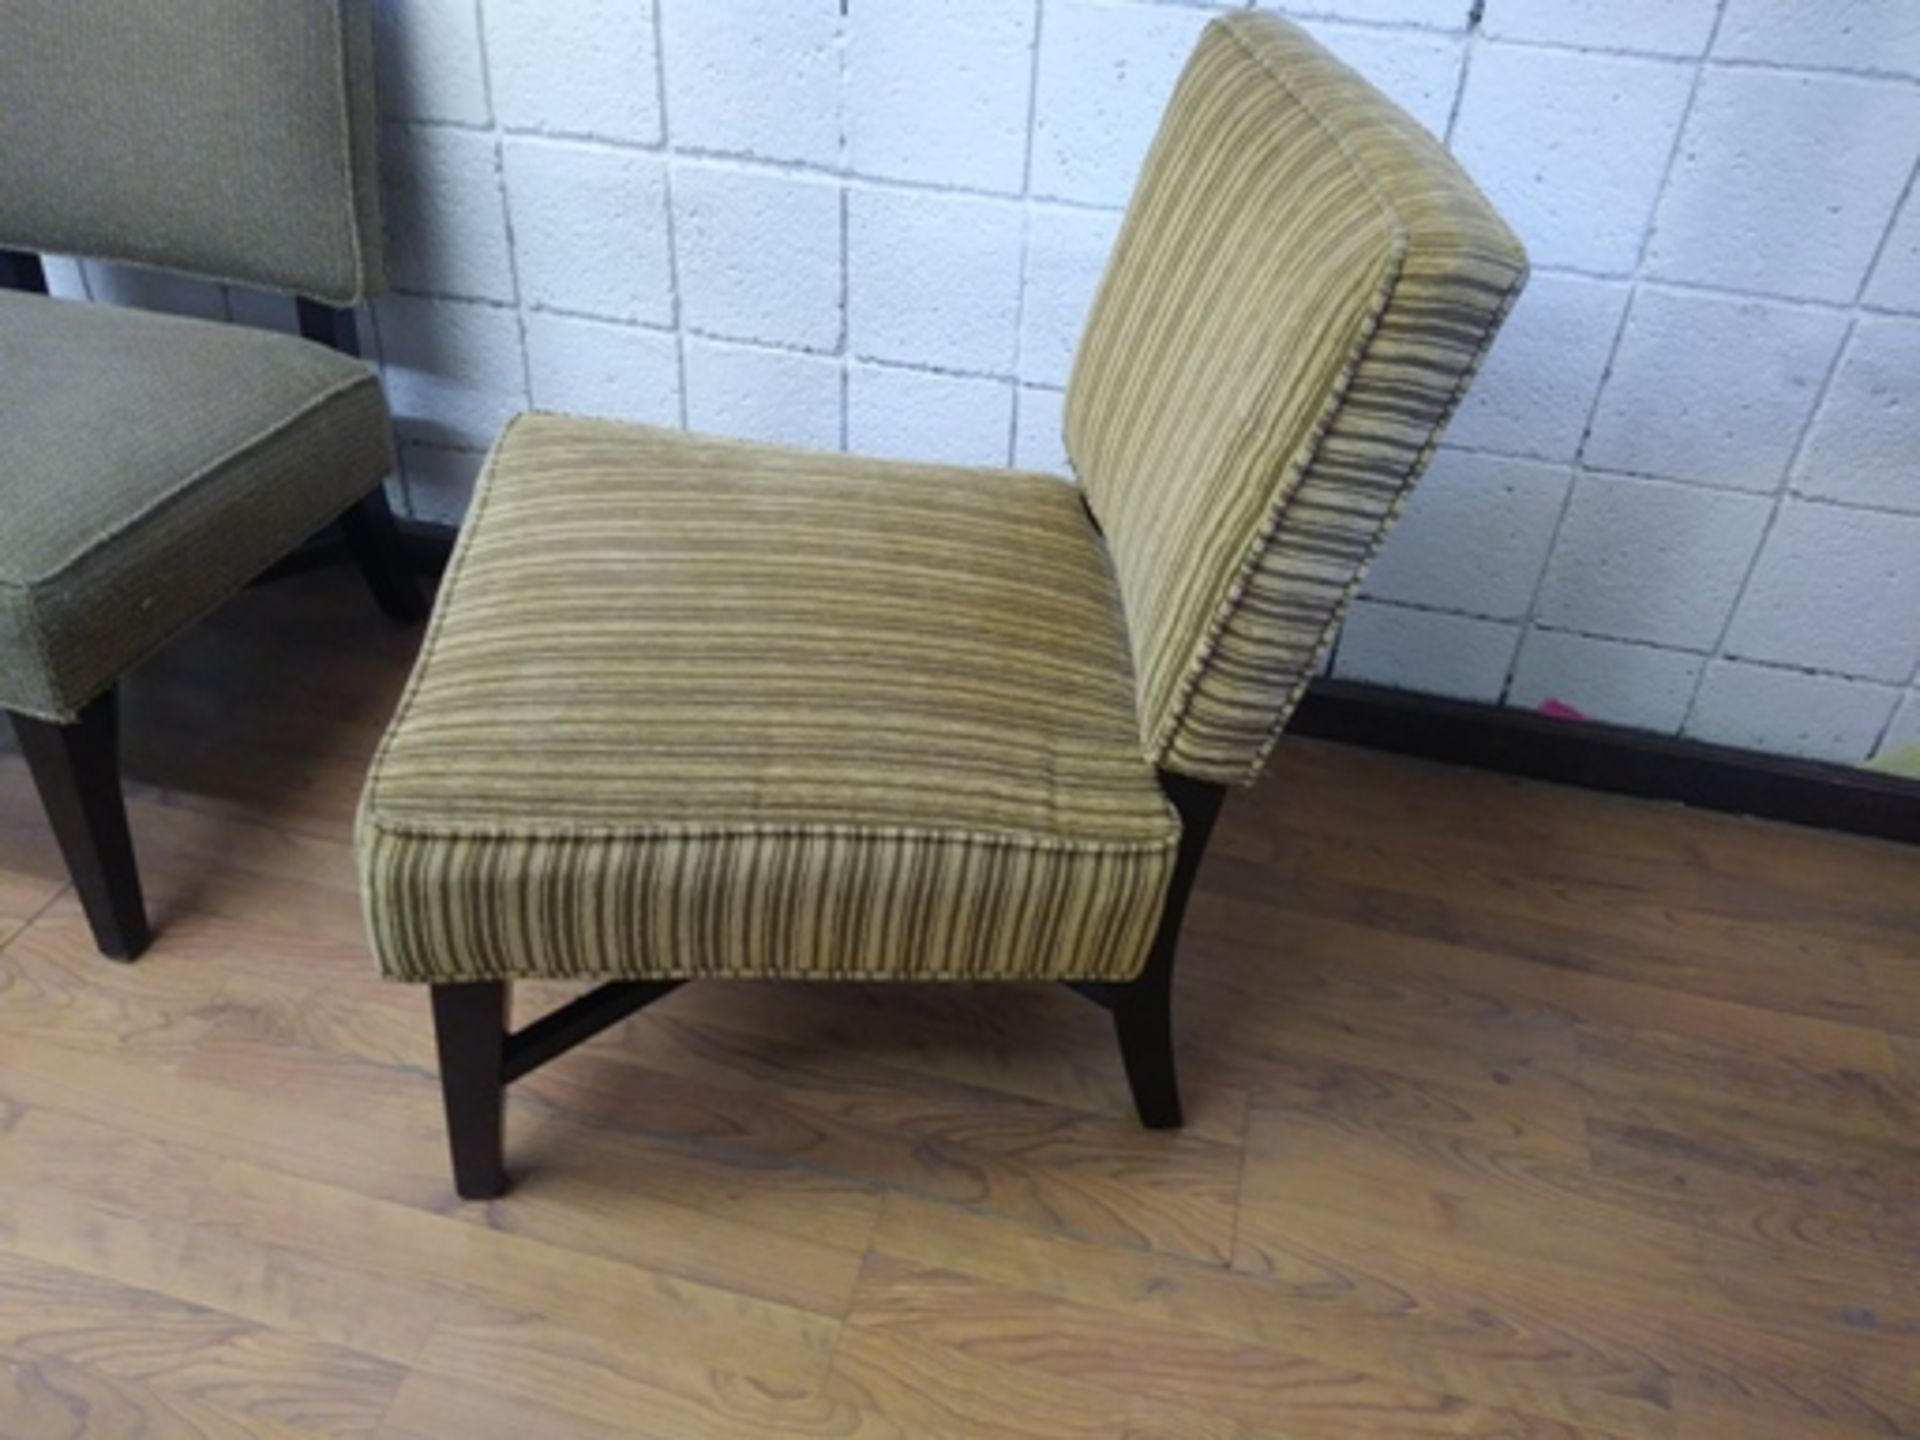 BROWN STRIP COLOR SIDE CHAIR - Image 2 of 4